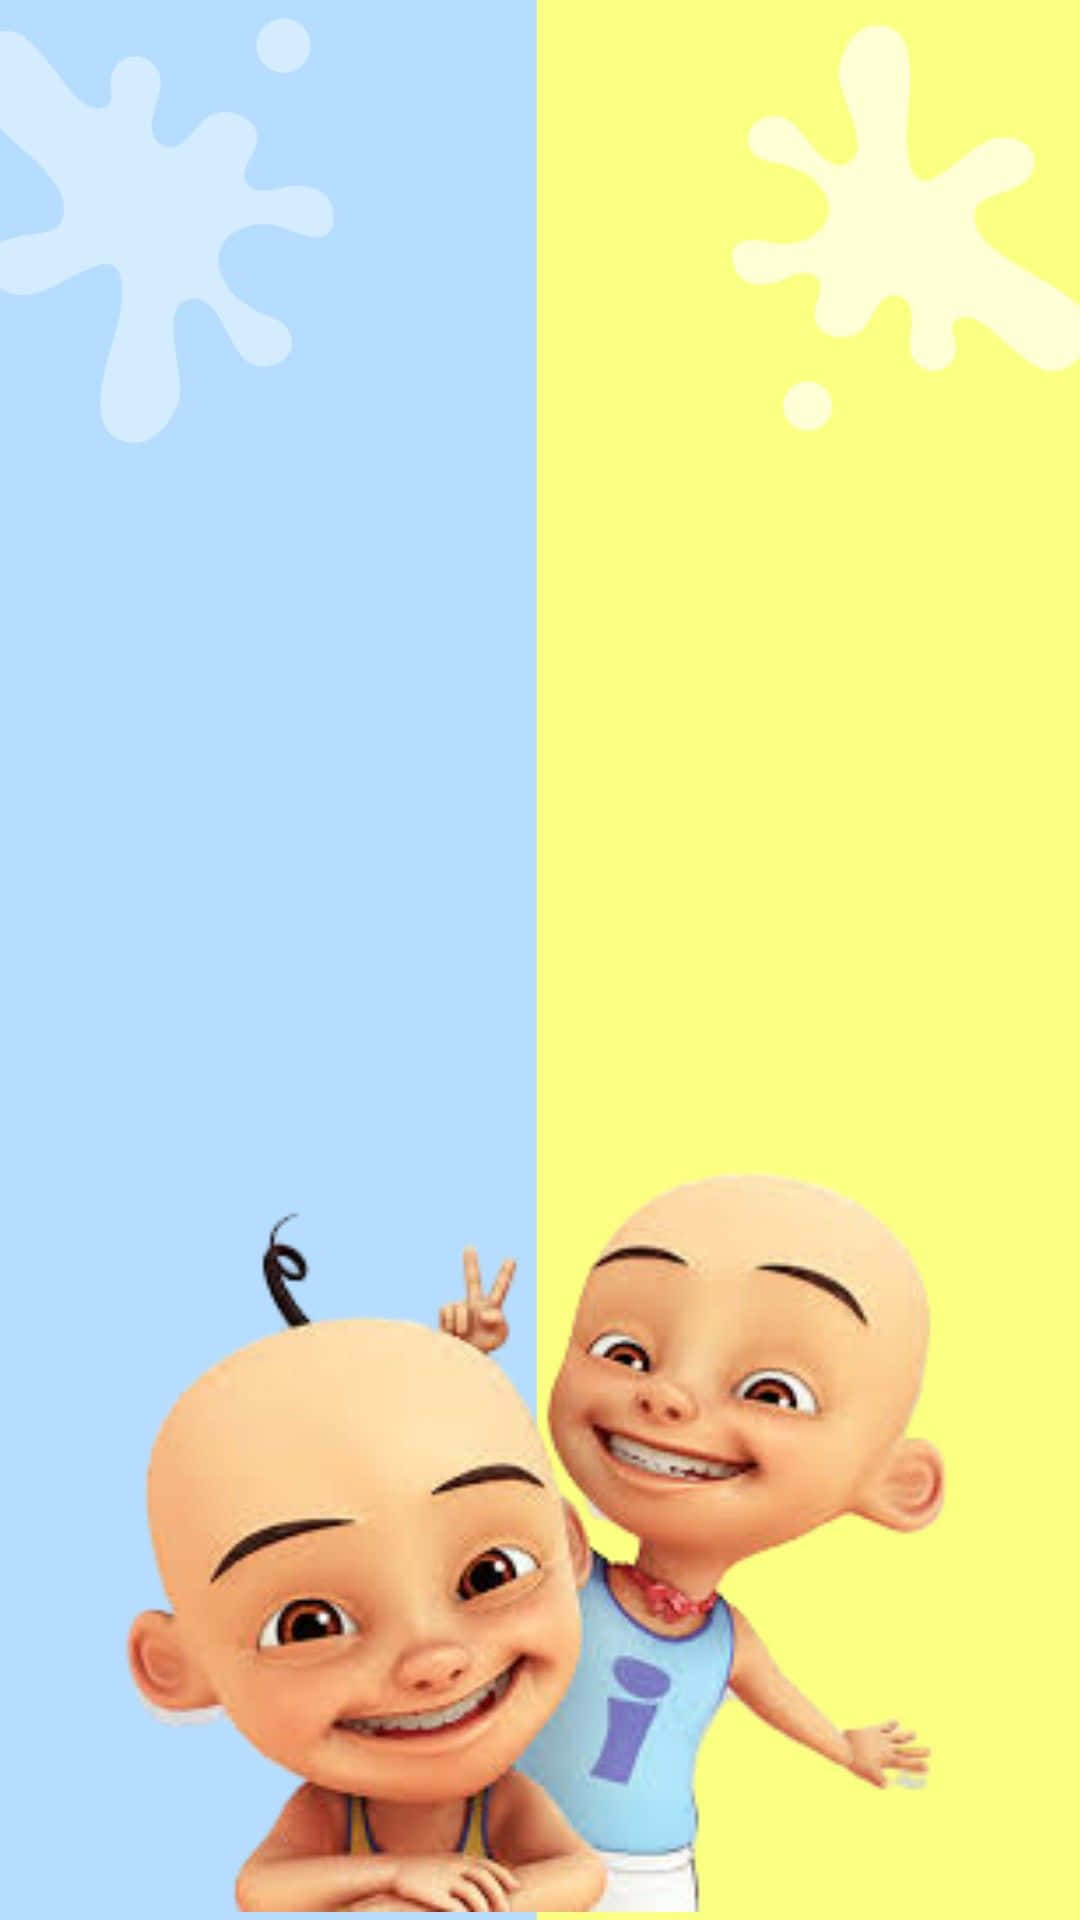 Two Cartoon Characters Standing Next To Each Other